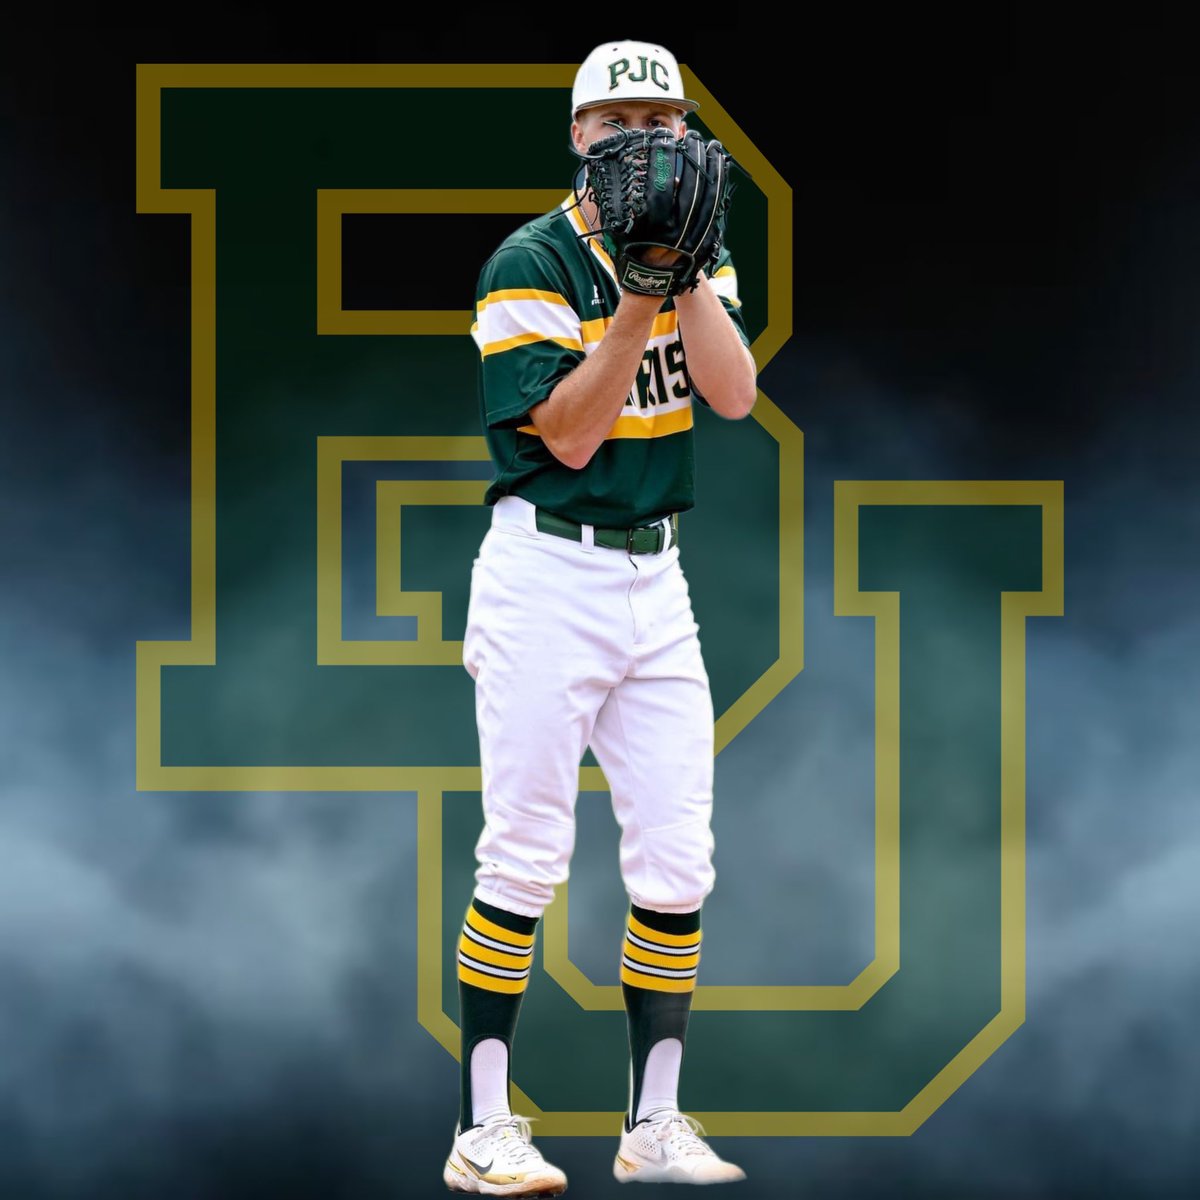 BIG congrats goes out to sophomore LHP @CalebCJ22 on his commitment to Baylor University!
#PJCbaseball #BuiltDifferent #D1Dragons